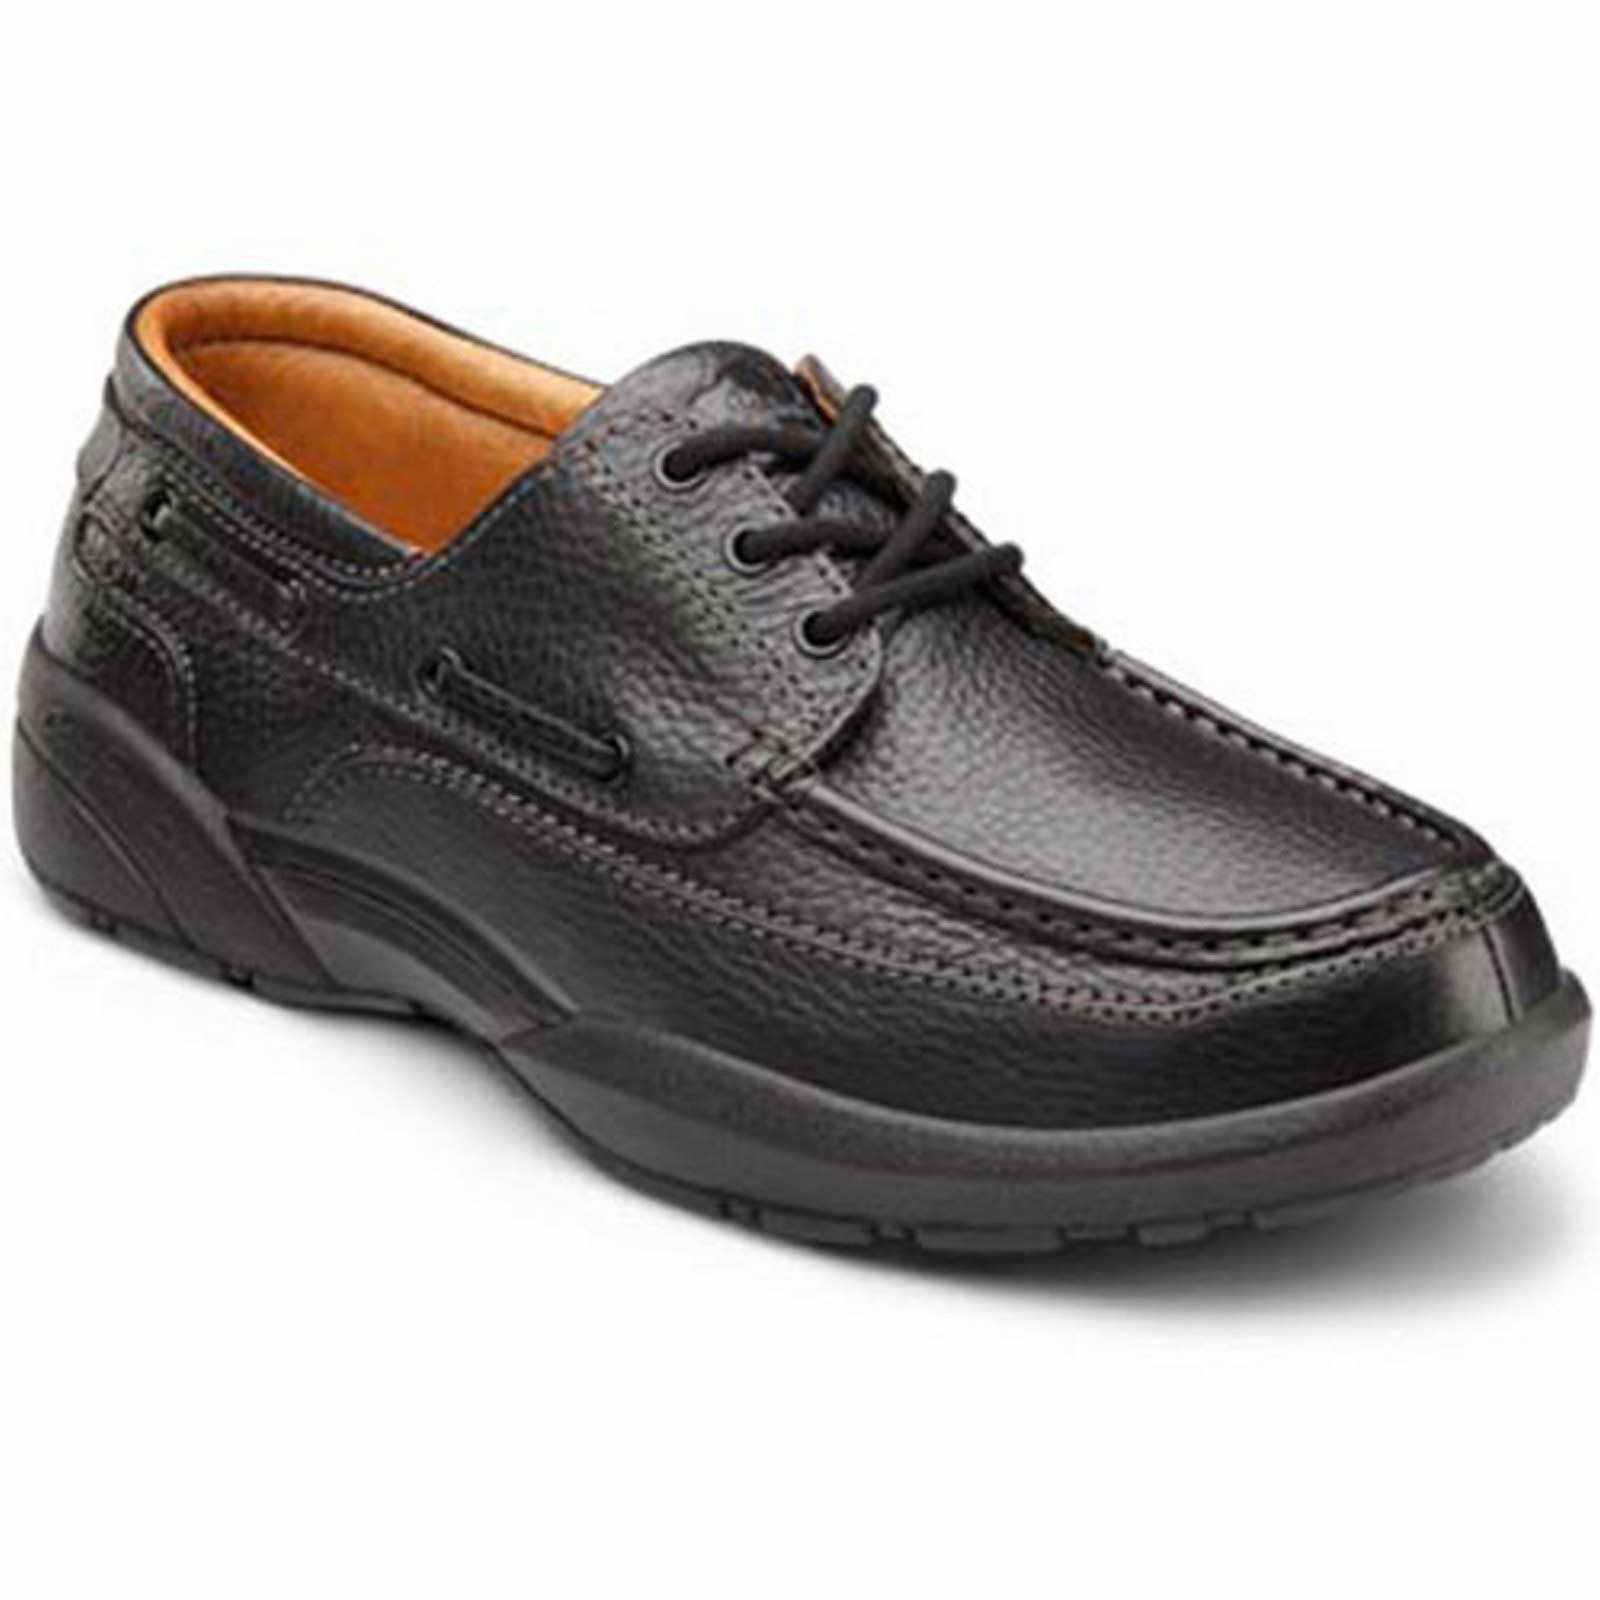 Dr. Comfort Shoes Patrick Men's Boat & Casual Shoe - Comfort Orthopedic Diabetic Shoe - Extra Depth For Orthotics - Extra Wide